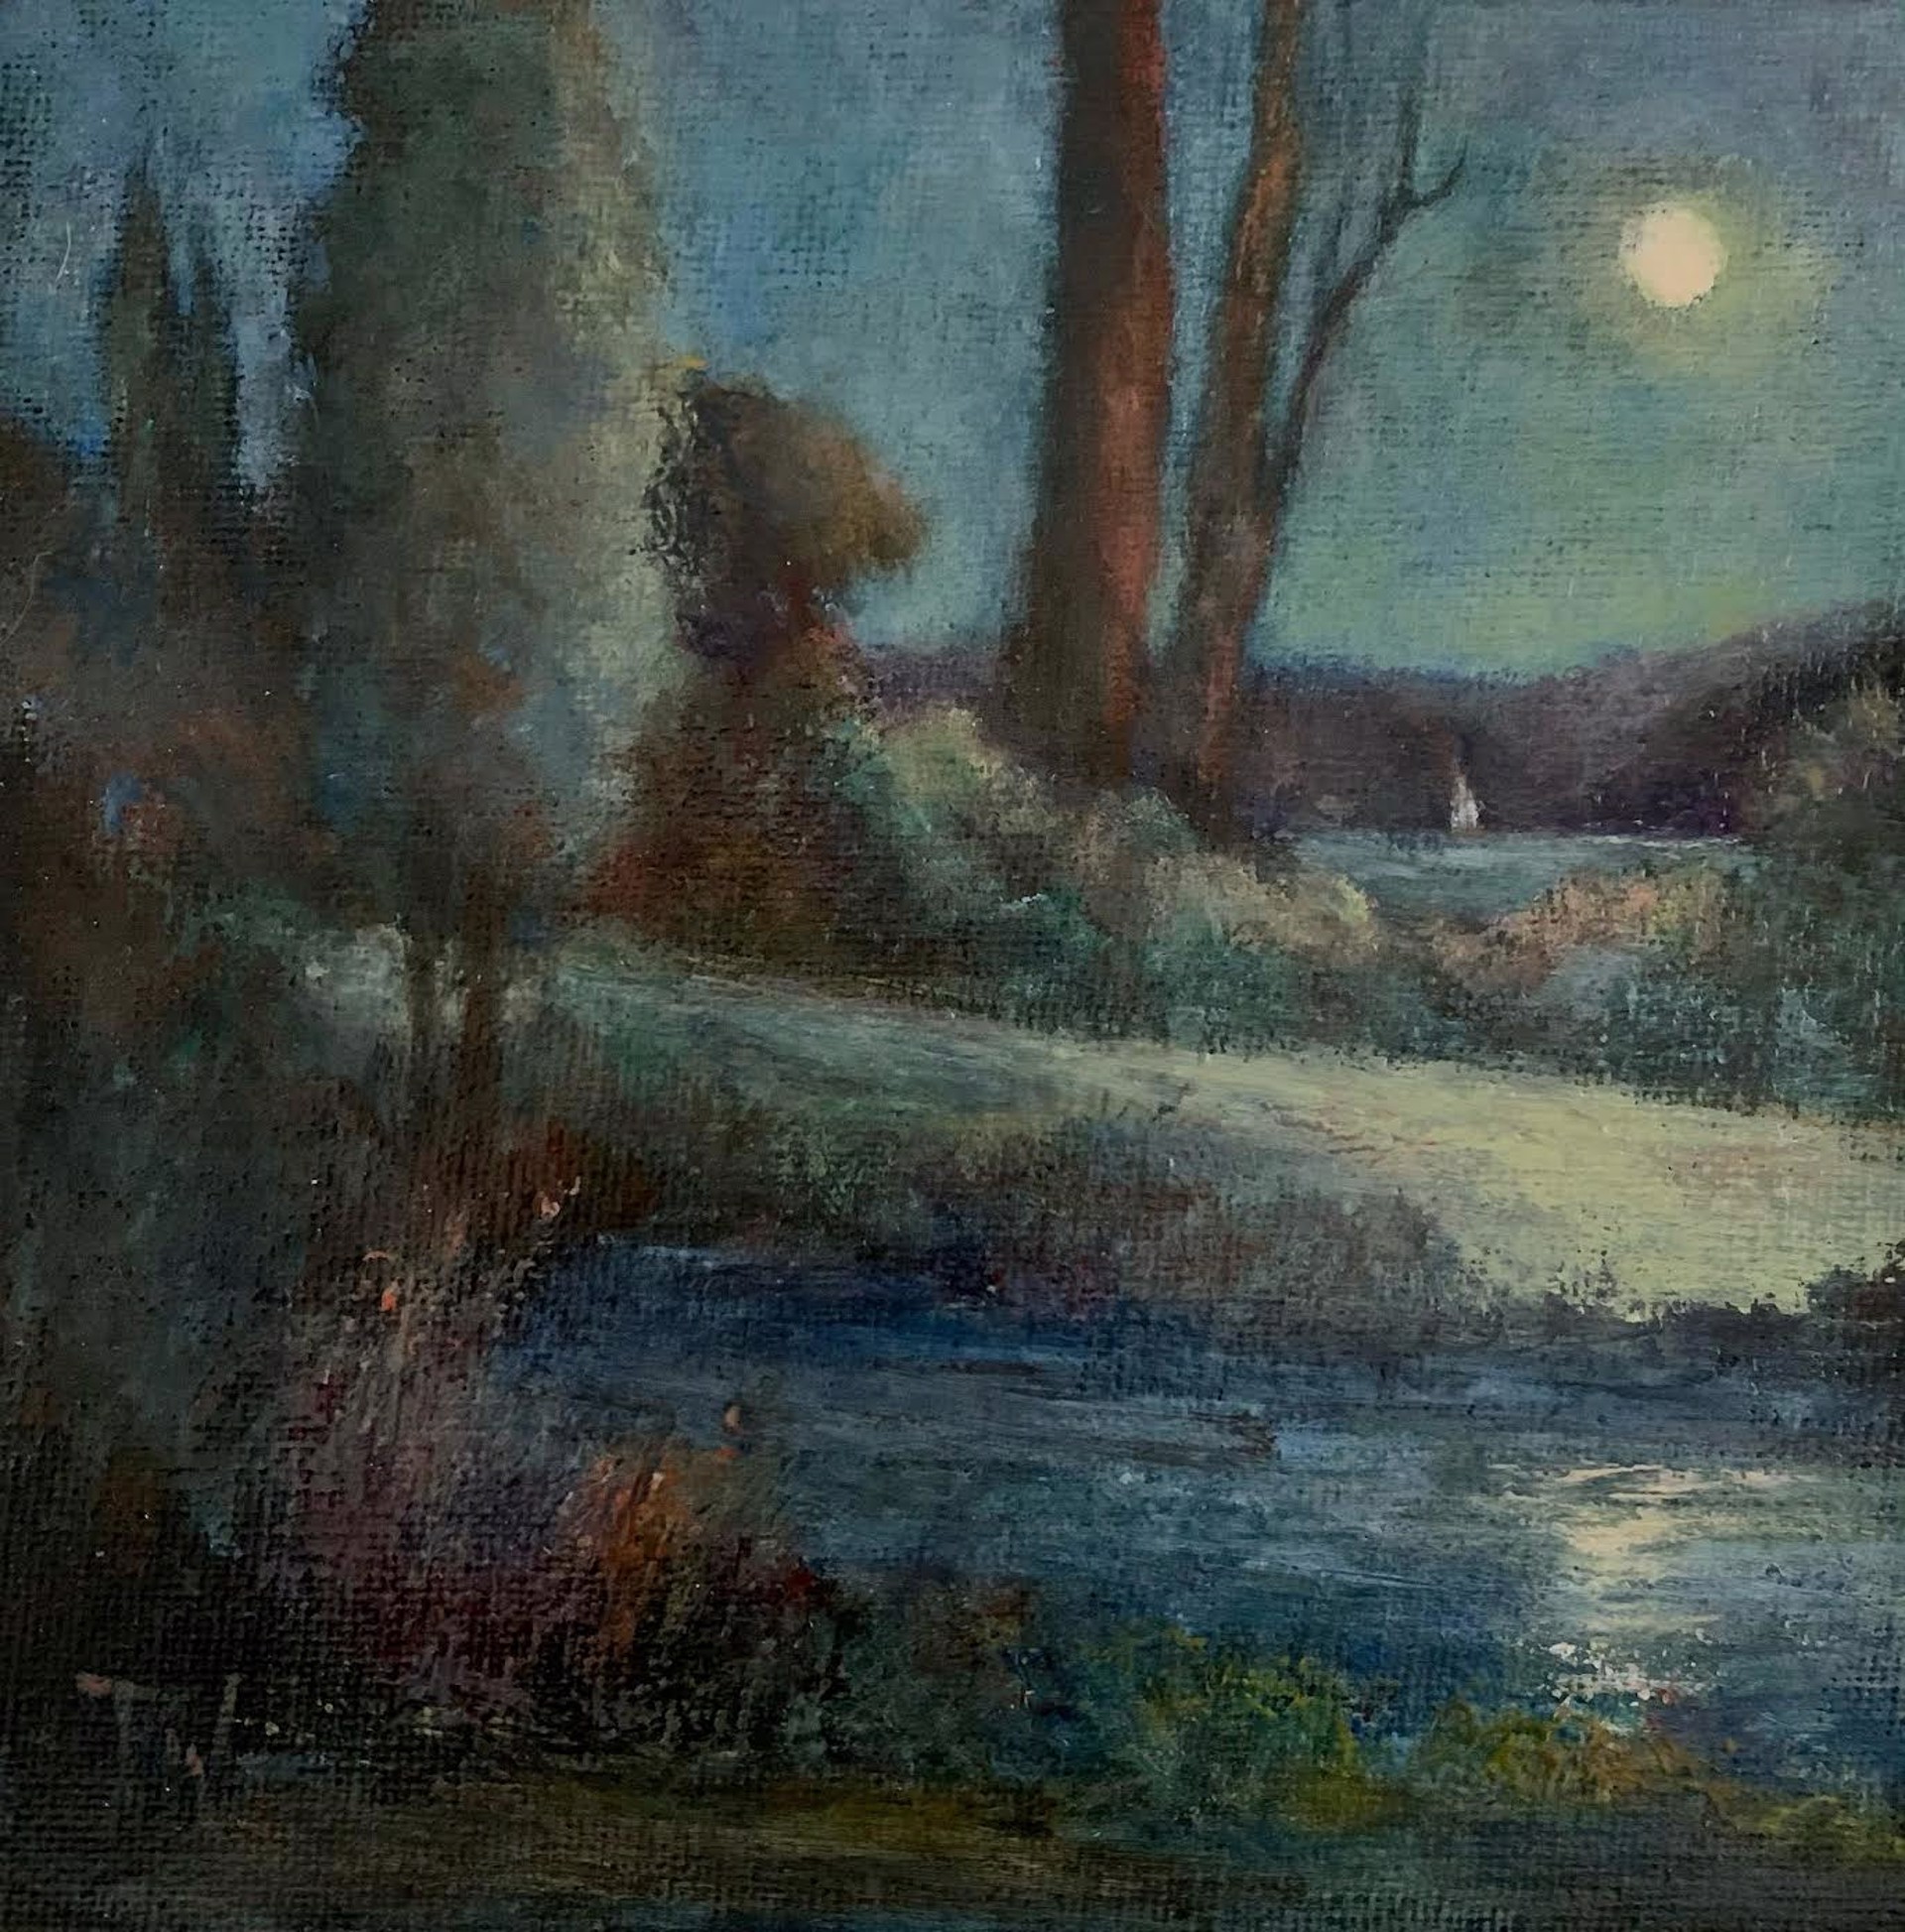 By The Light of The Moon by Pamela Wachtler